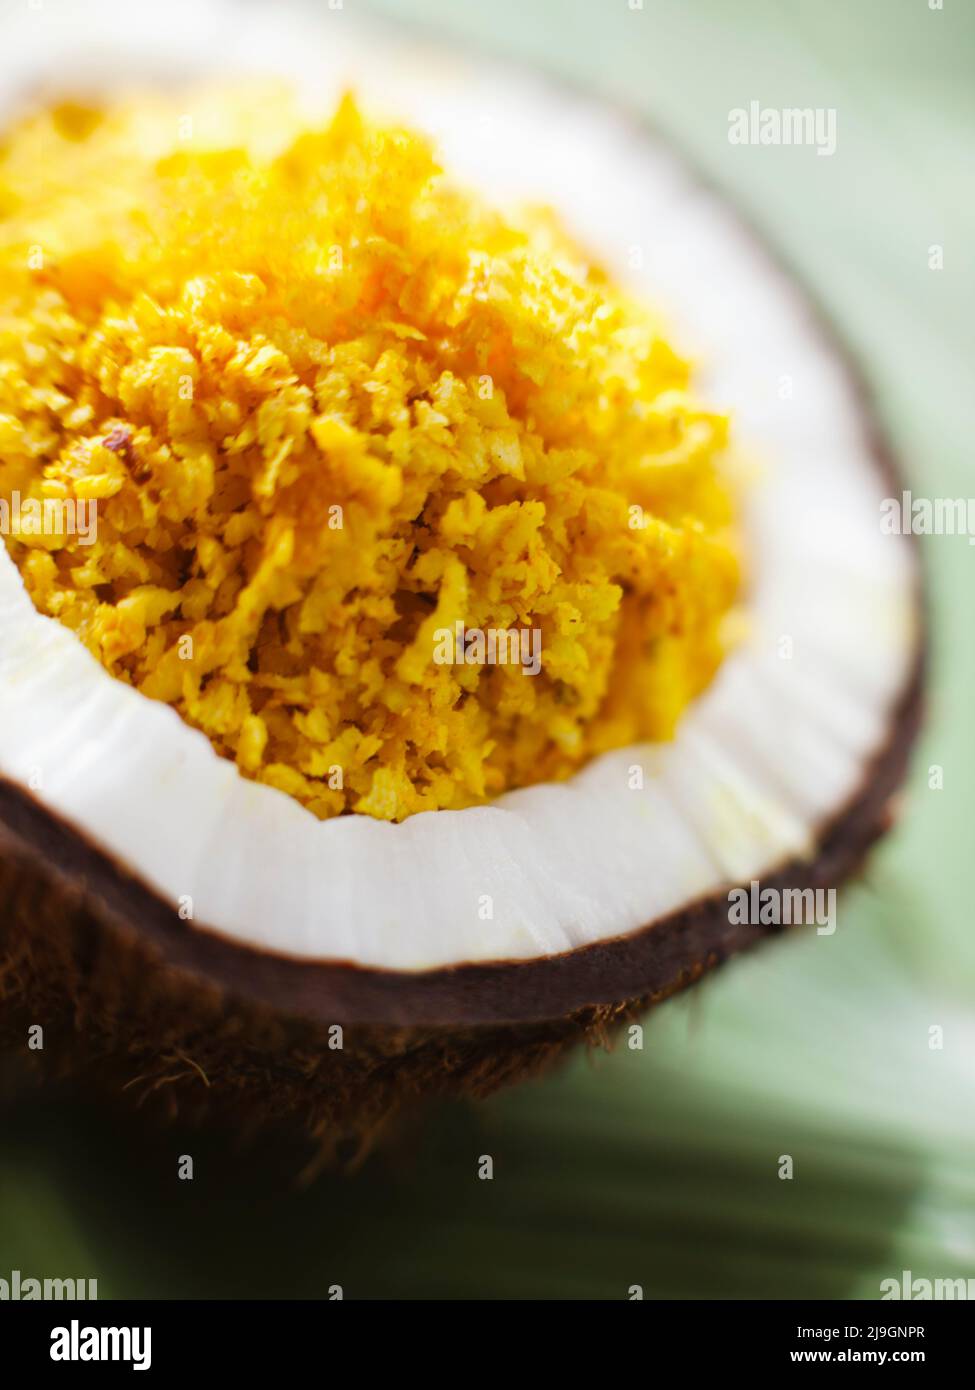 Raw Spa Ingredients. The coconut scrub is applied directly in a rubbing motion to exfoliate and smoothen the skin. Palakkad, Kerala, India Stock Photo